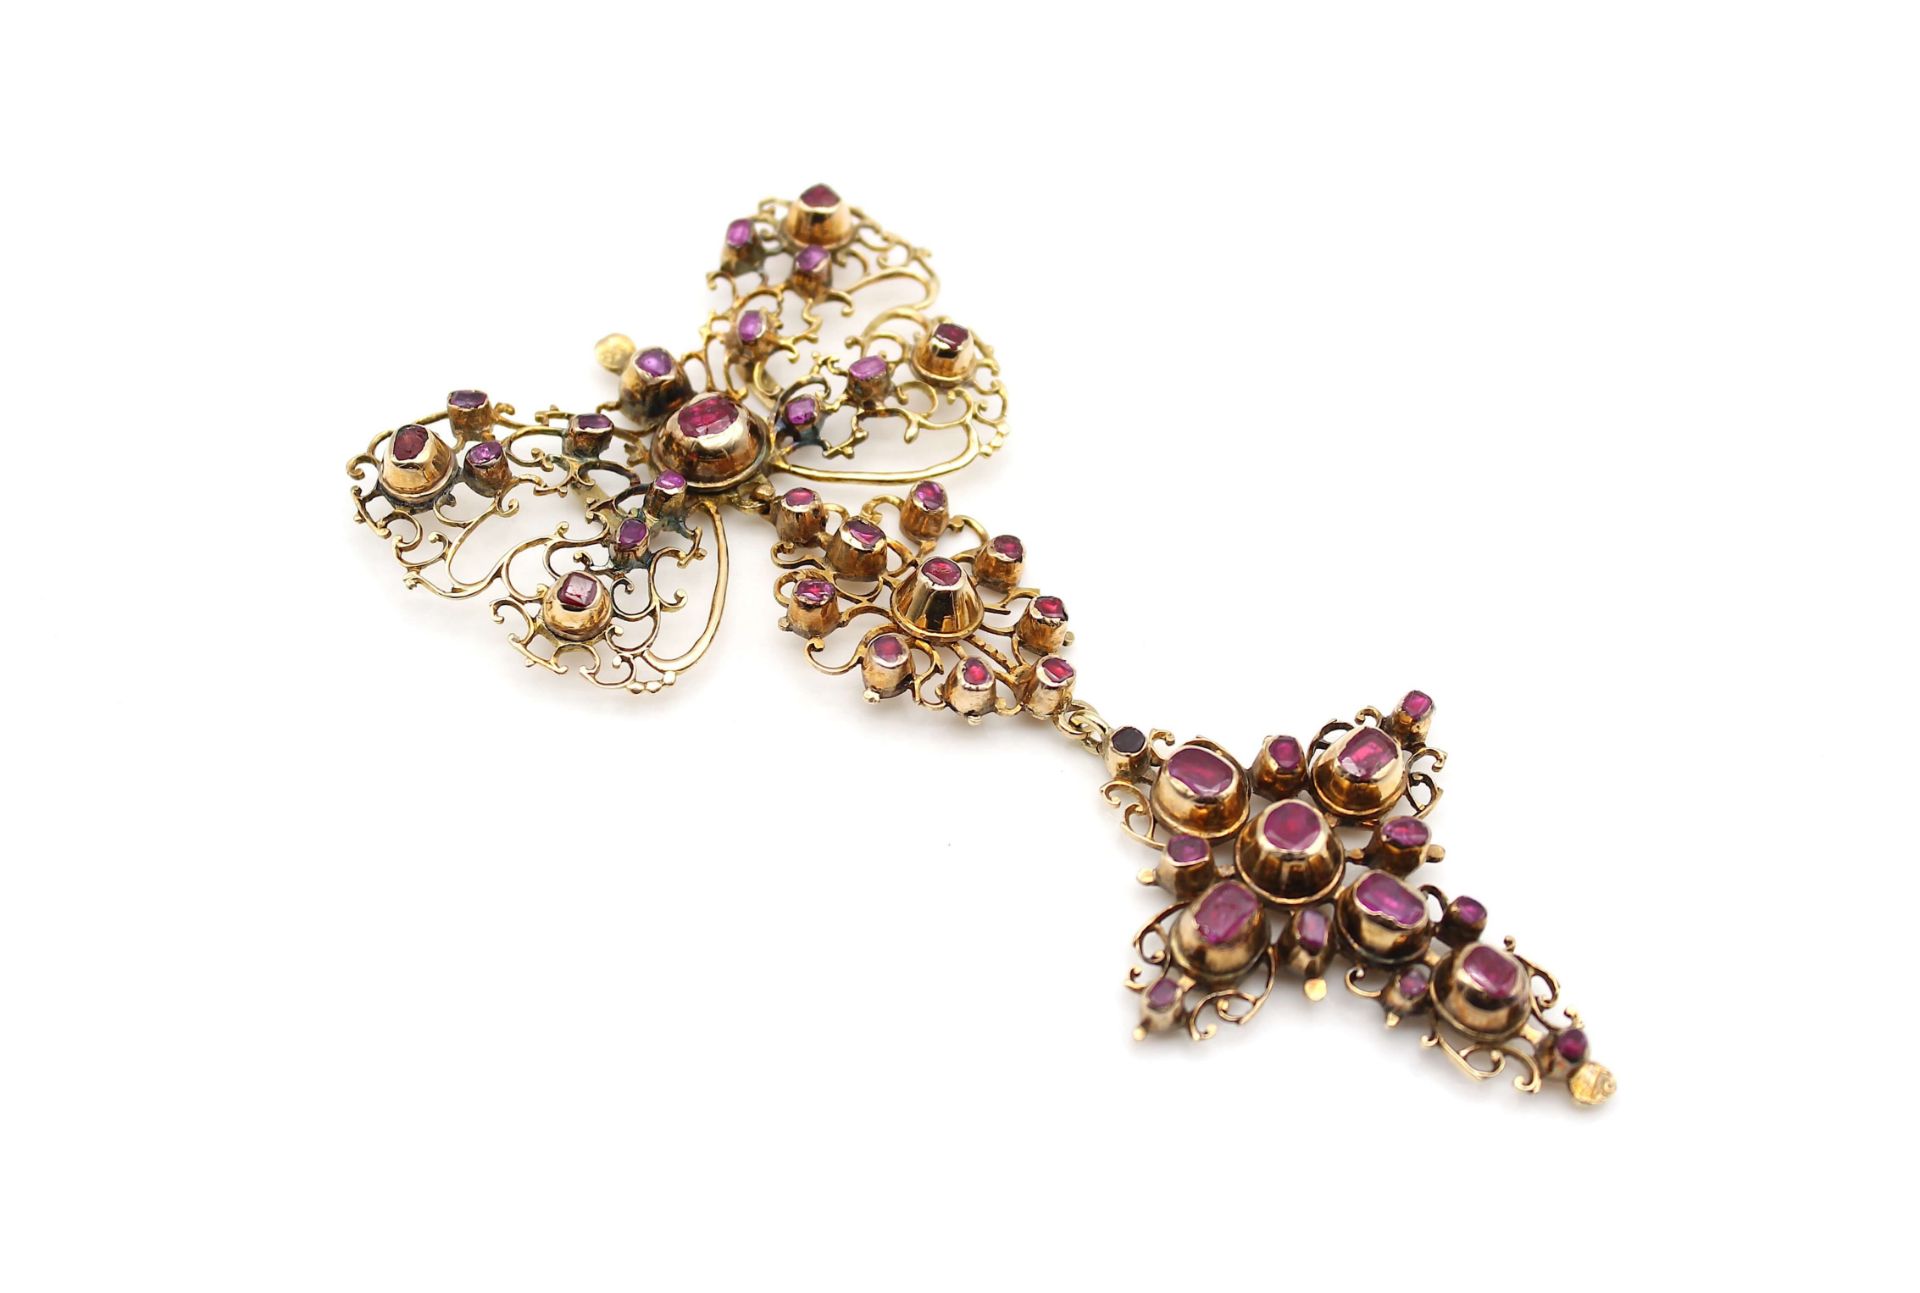 Corsage brooch / pendant around 1750 with sapphires and rubies - Image 3 of 6